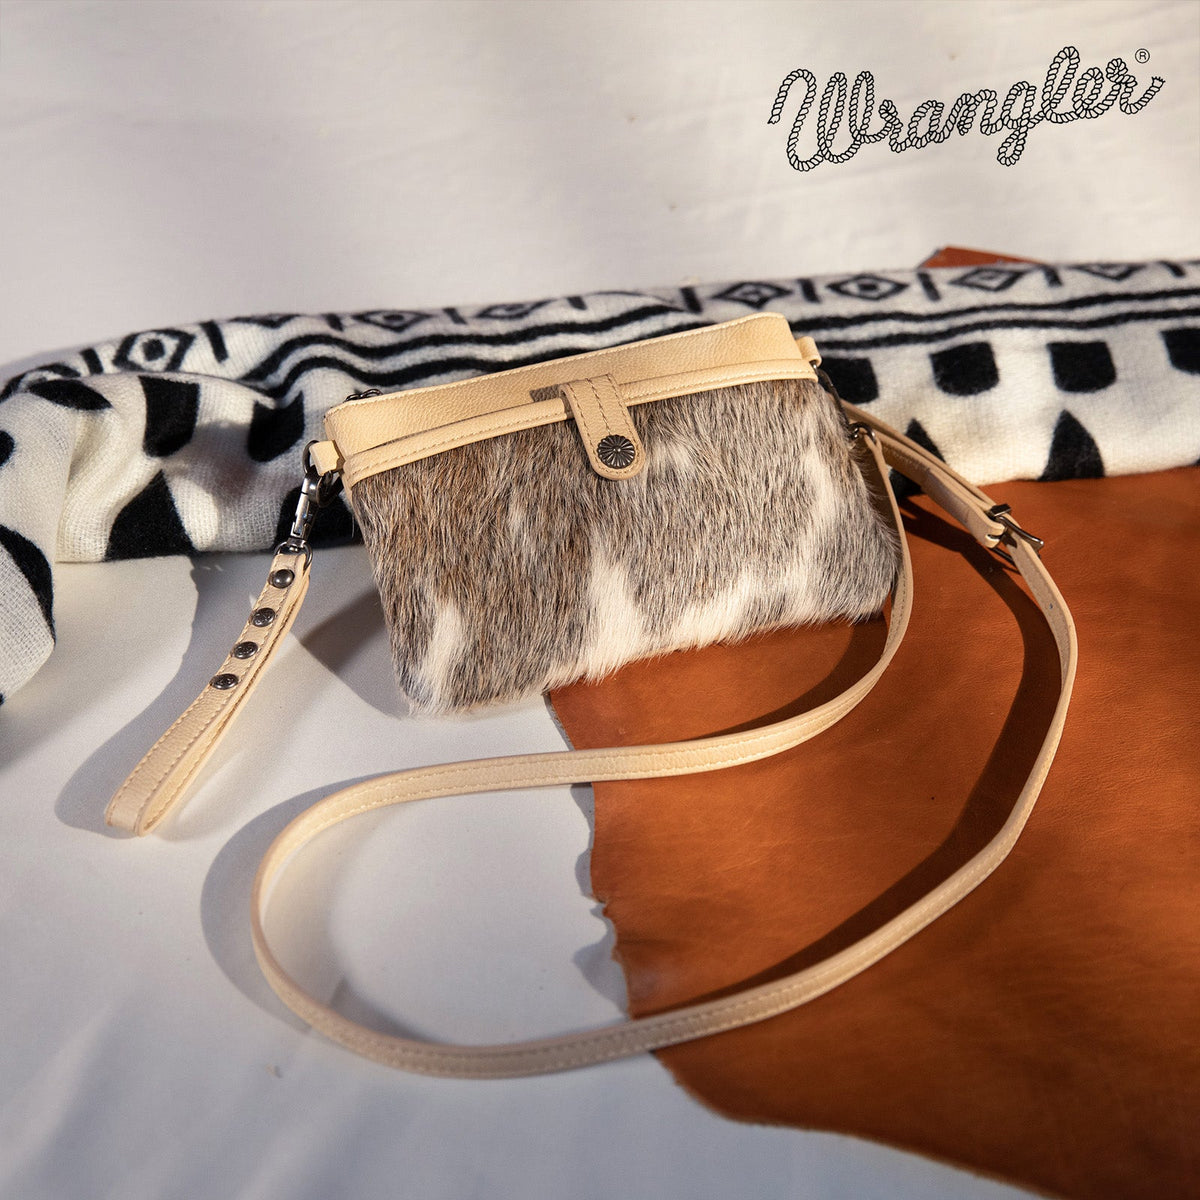 Wrangler Hair-On Cowhide Collection Crossbody - Cowgirl Wear